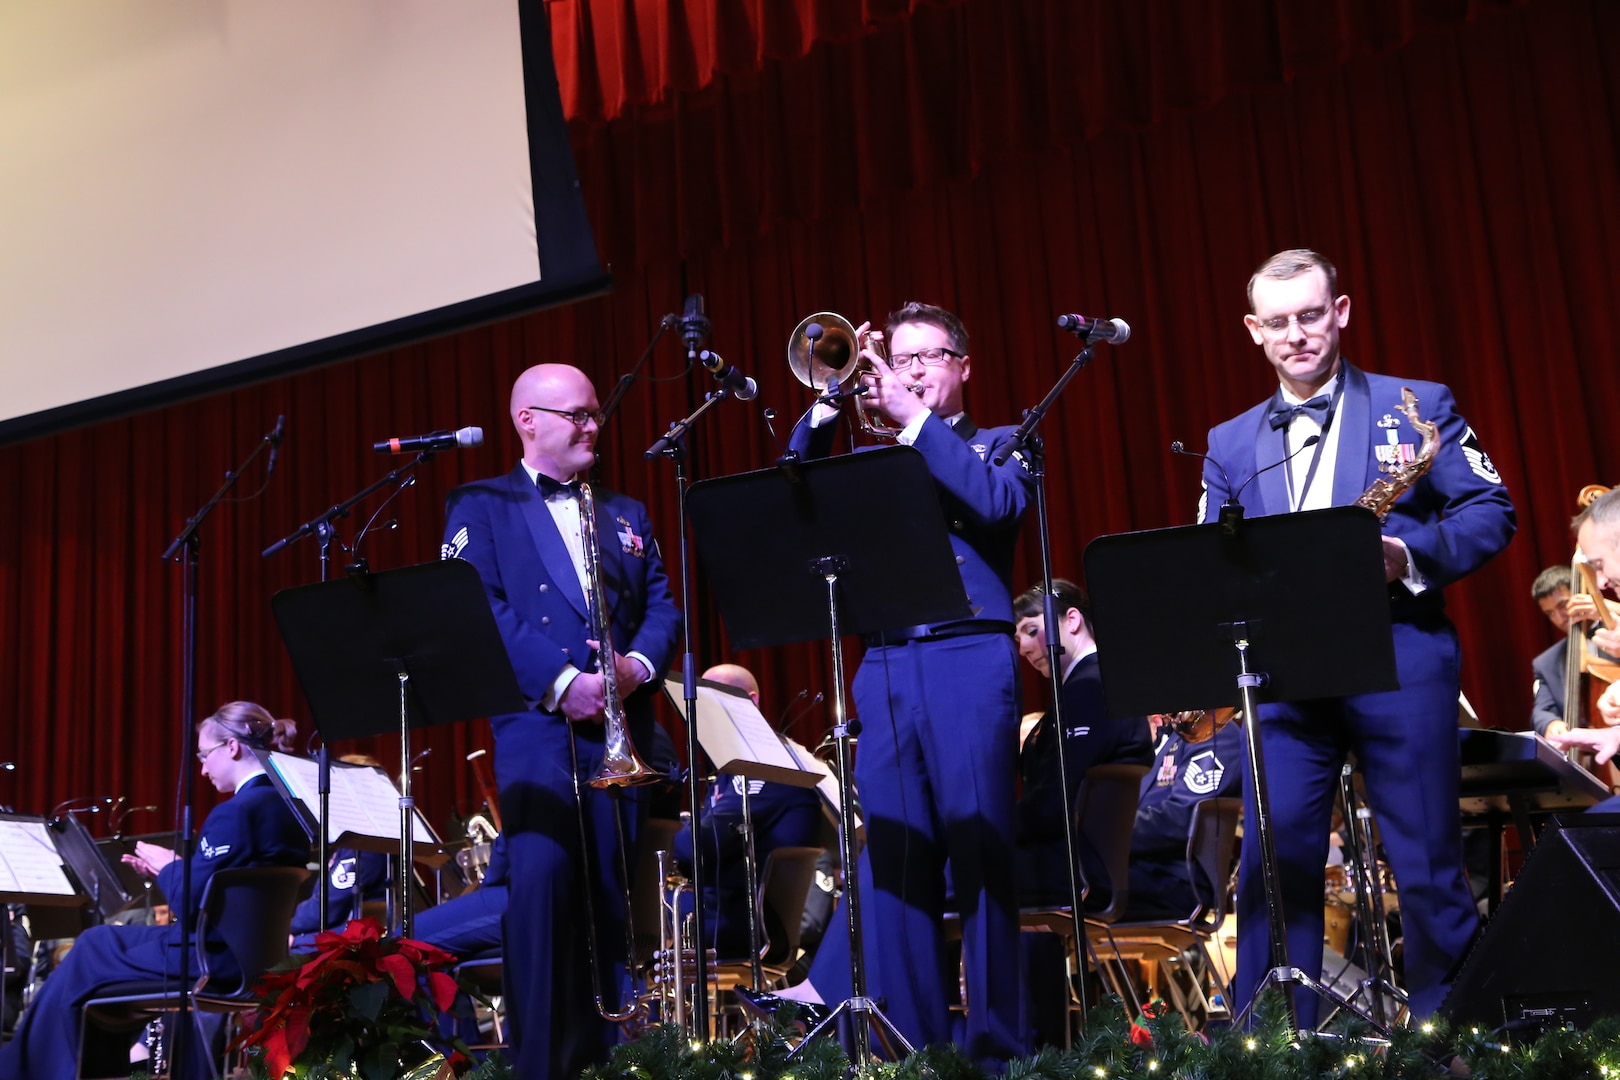 Members of the Air Force Band of the West’s musical ensemble “Warhawk” play a variety of holiday songs Dec. 17 at the Joint Base San Antonio-Lackland Bob Hope Theater. (U.S. Air Force photo by Airman 1st Class Lincoln Korver)